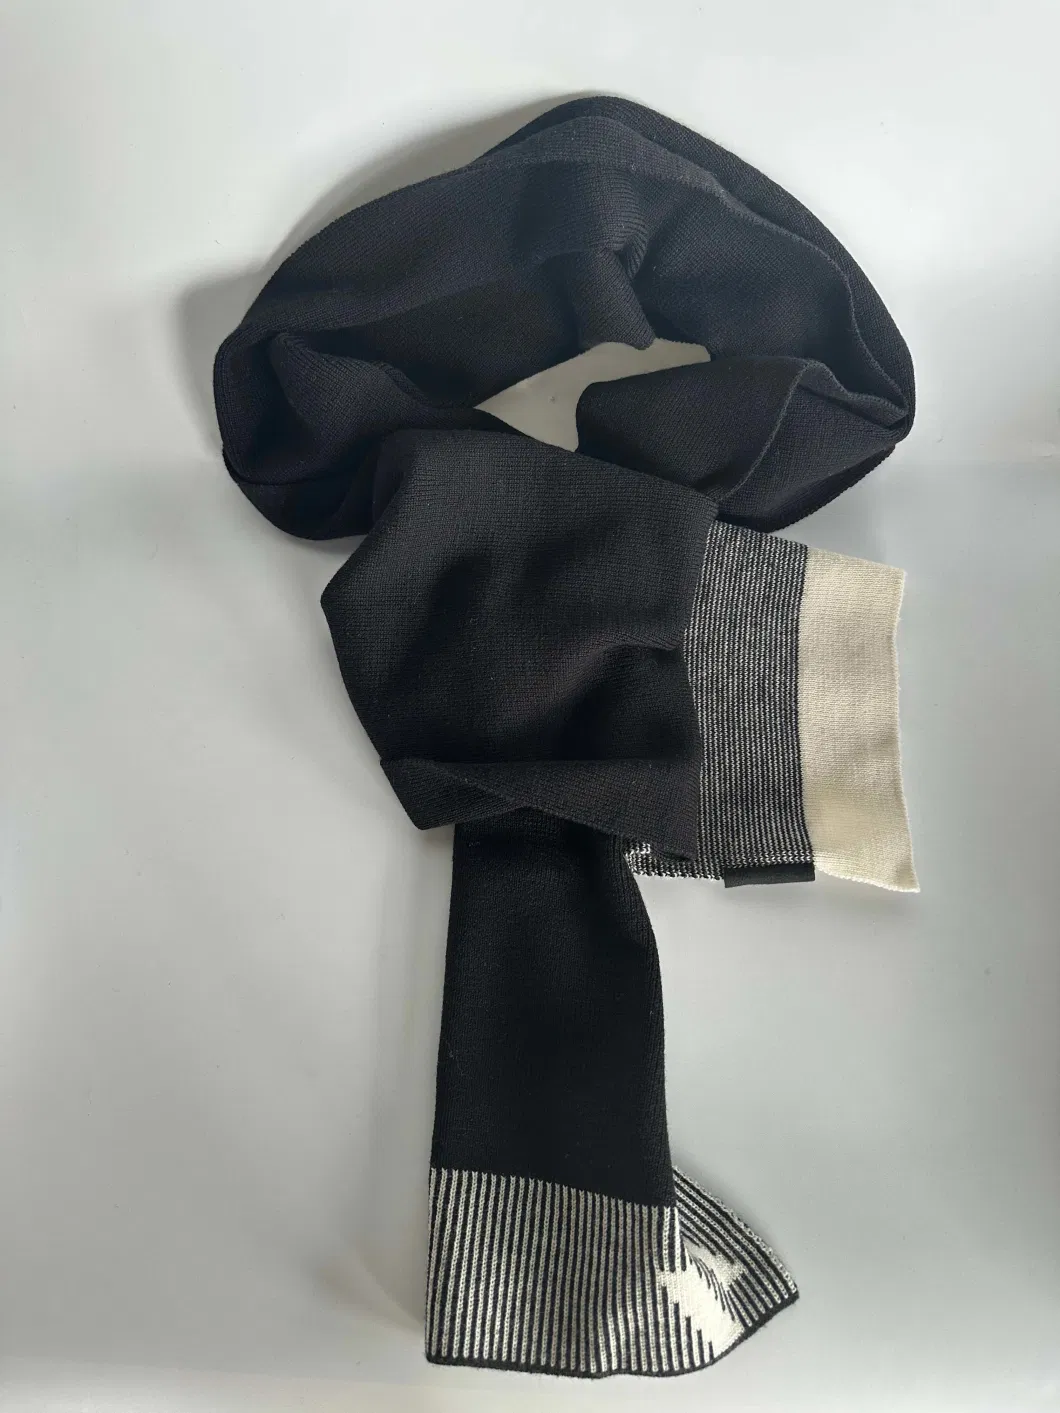 Hold Plus Wool Acrylic Cotton Scarves Black and White Simple Fashion